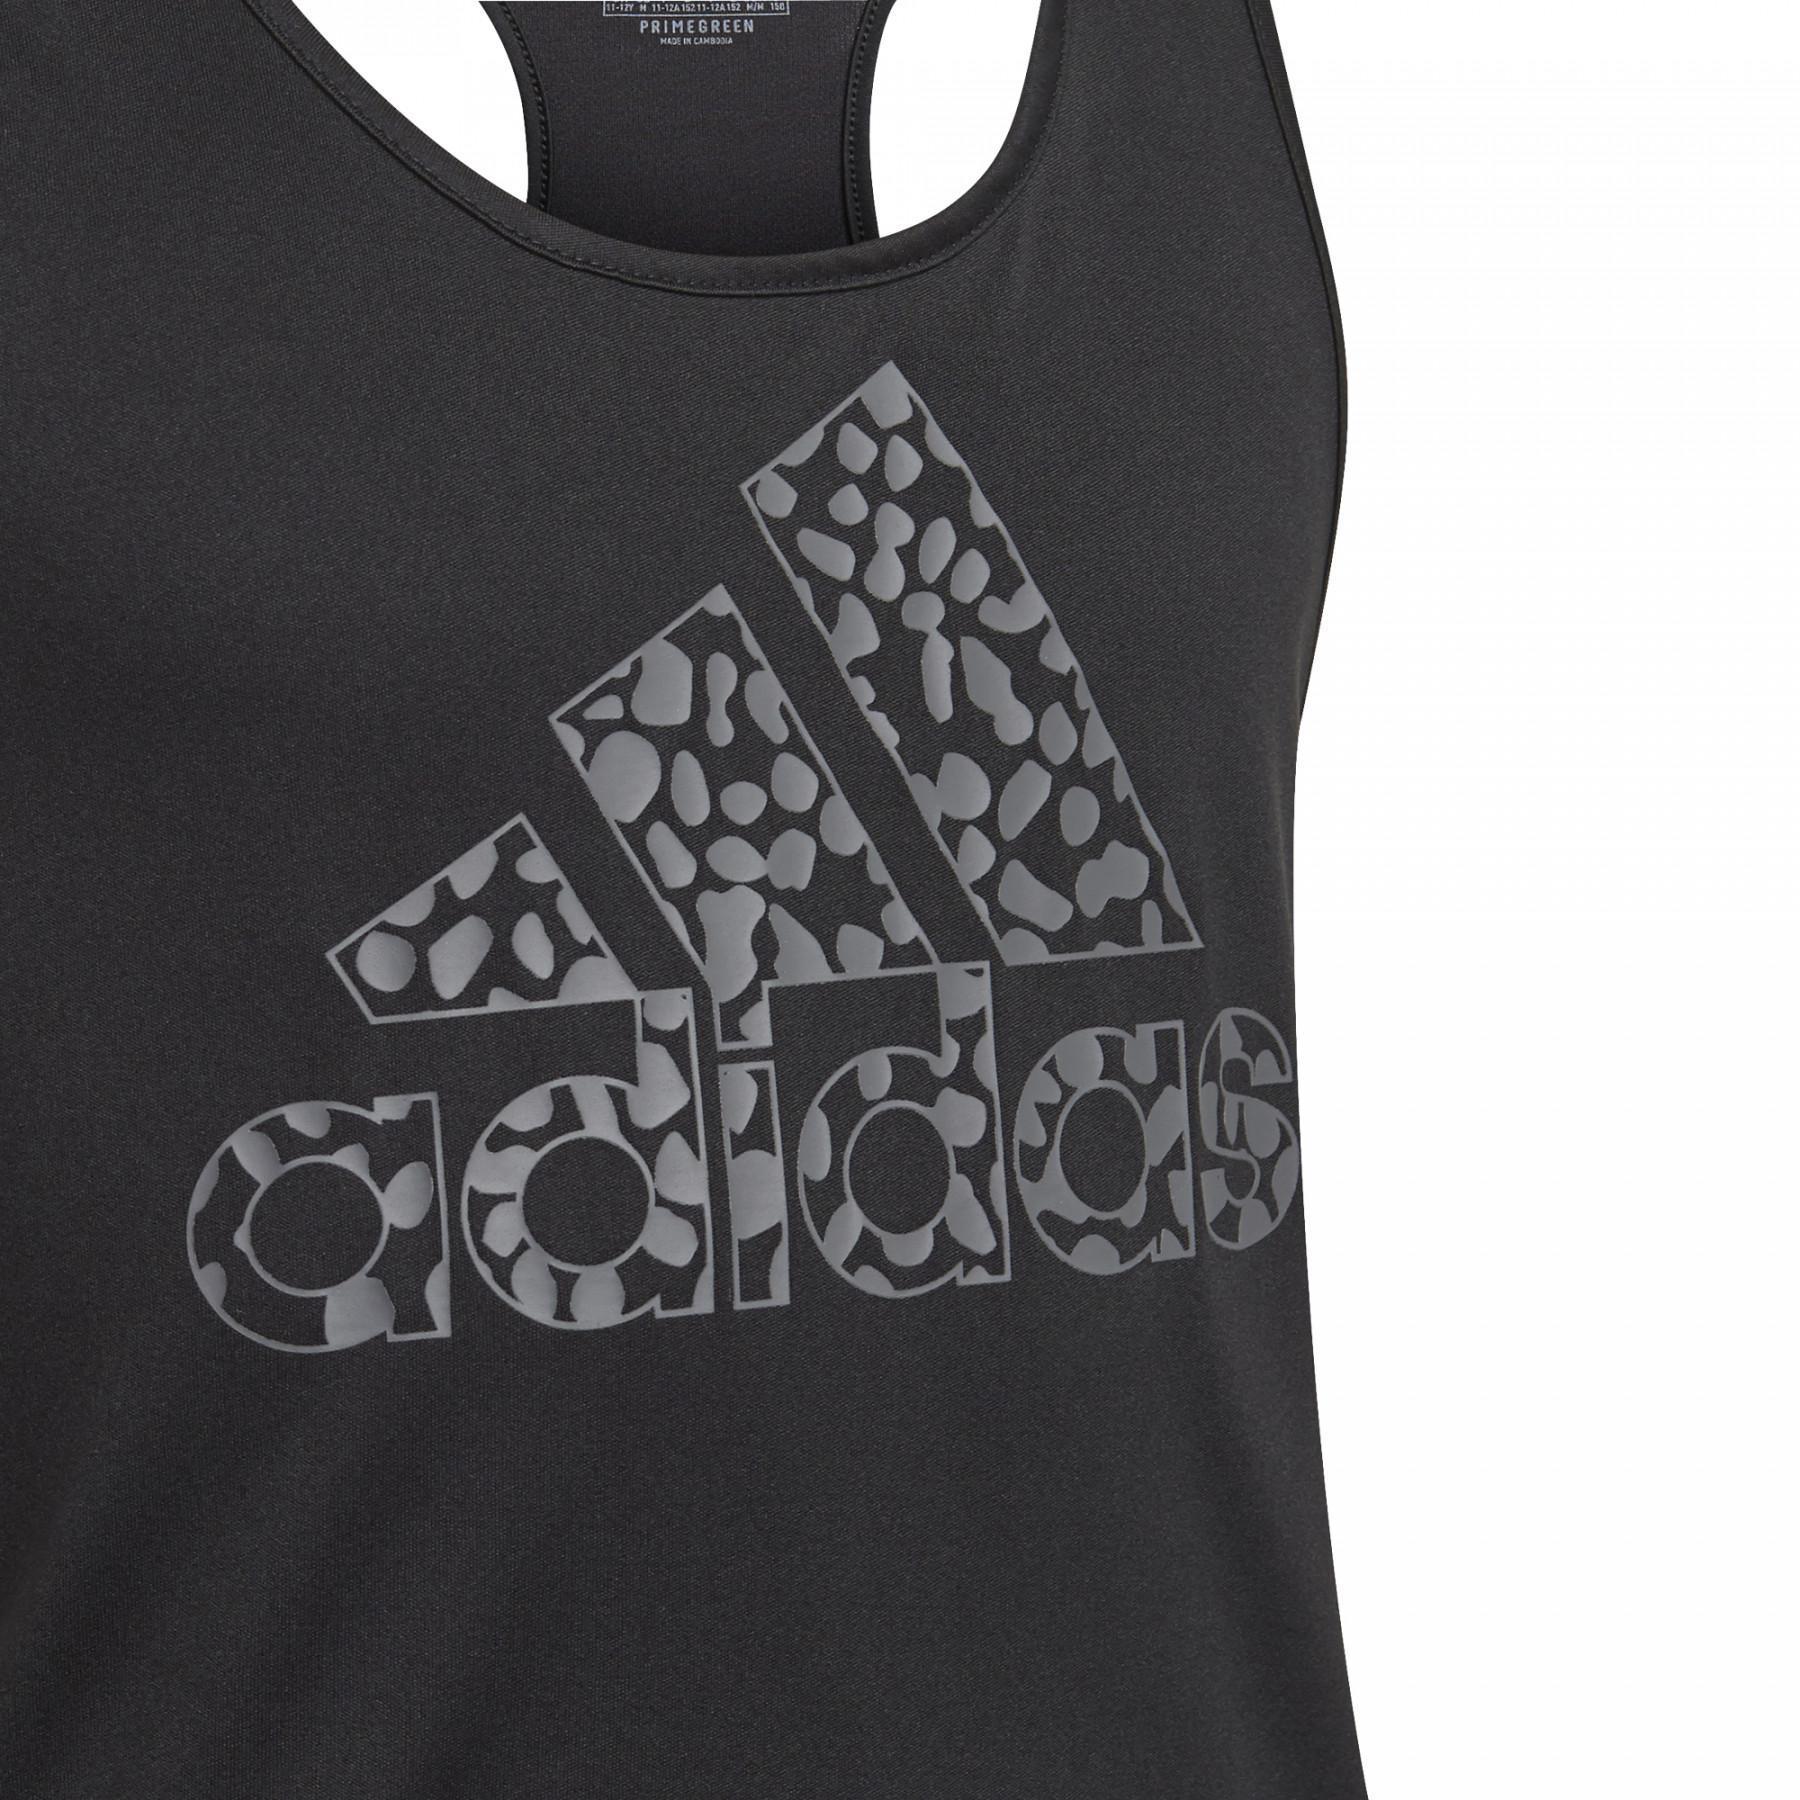 Children's tank top adidas Designed To Move Leopard